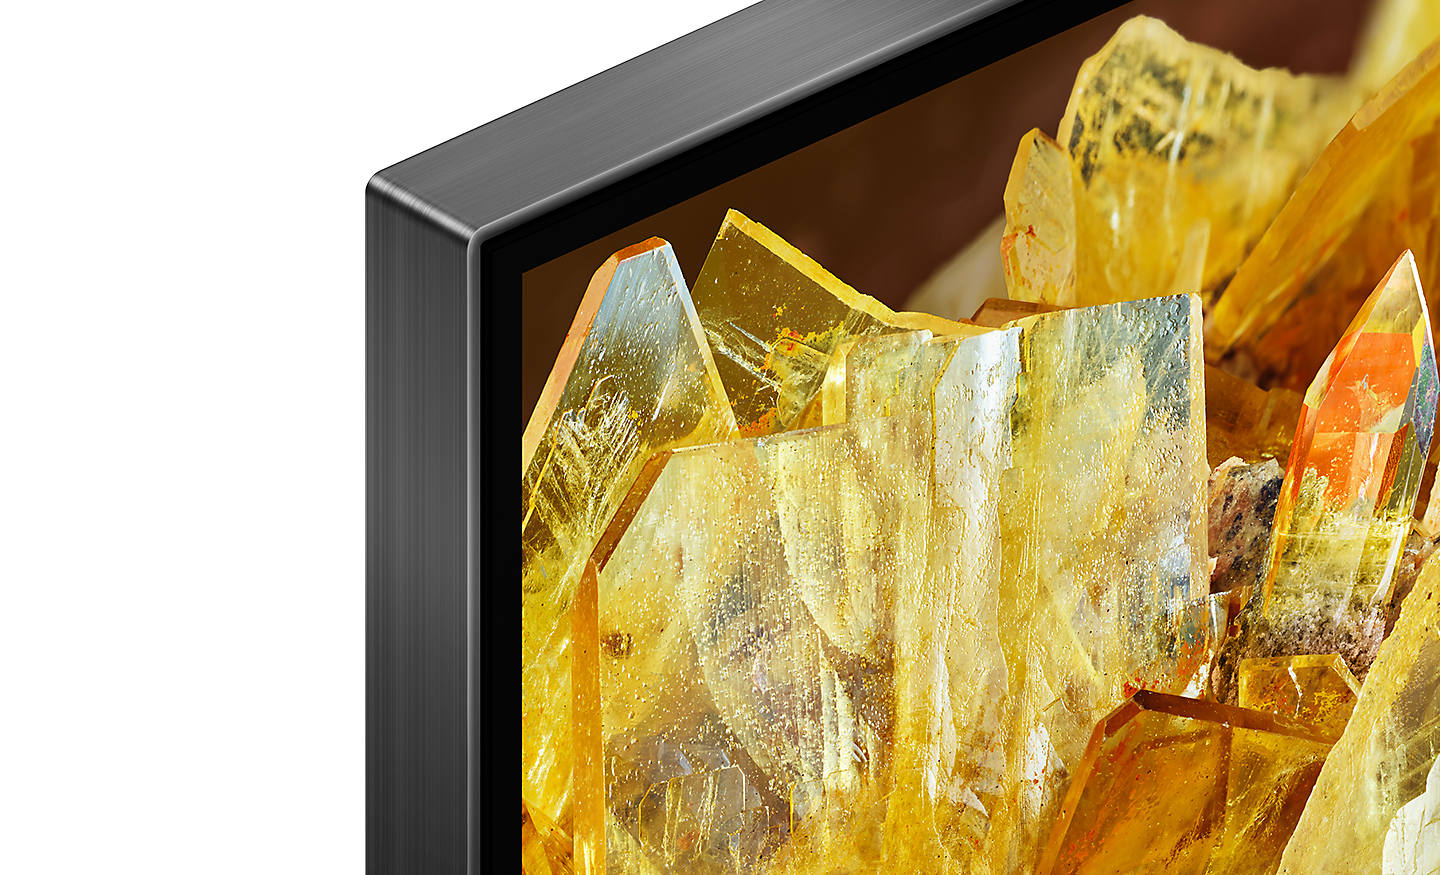 Corner of TV showing gold crystals on screen